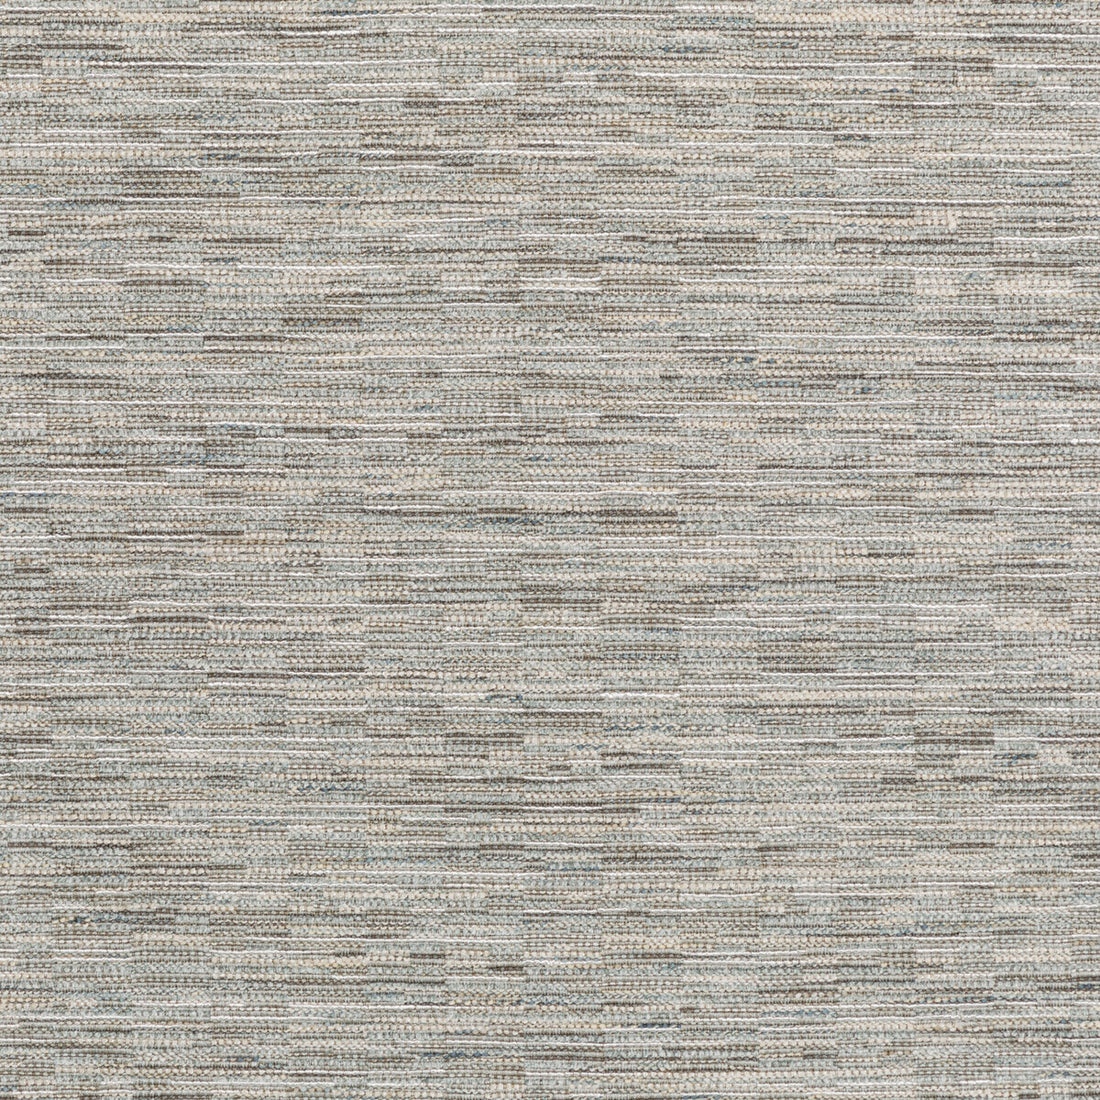 Noni Texture fabric in platinum color - pattern 36050.115.0 - by Kravet Couture in the Luxury Textures II collection